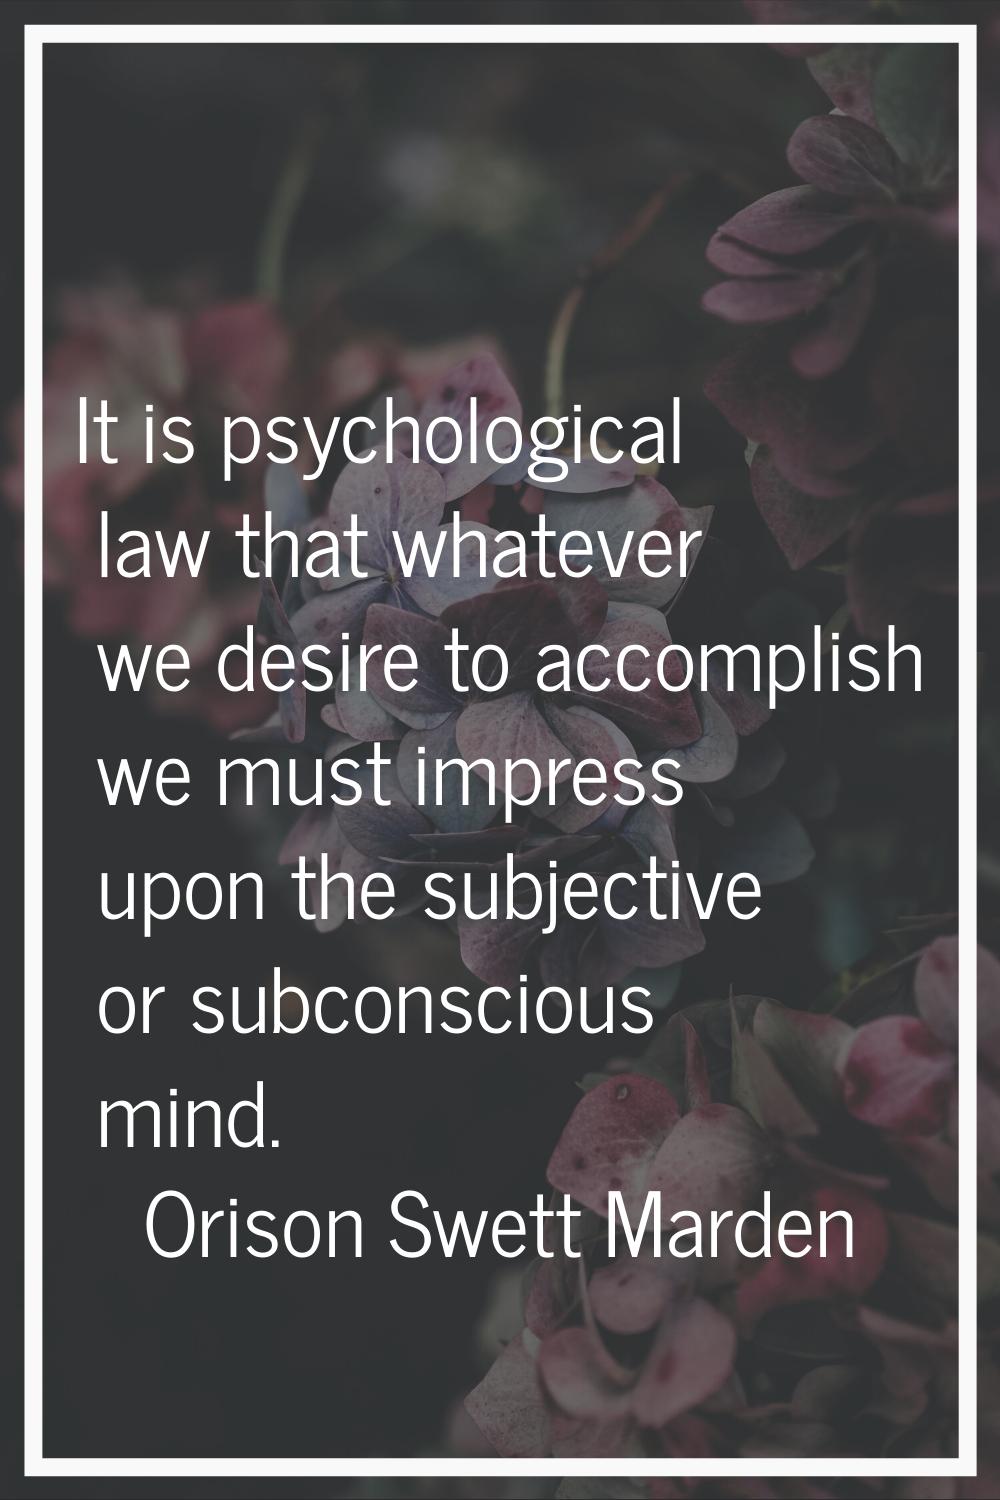 It is psychological law that whatever we desire to accomplish we must impress upon the subjective o